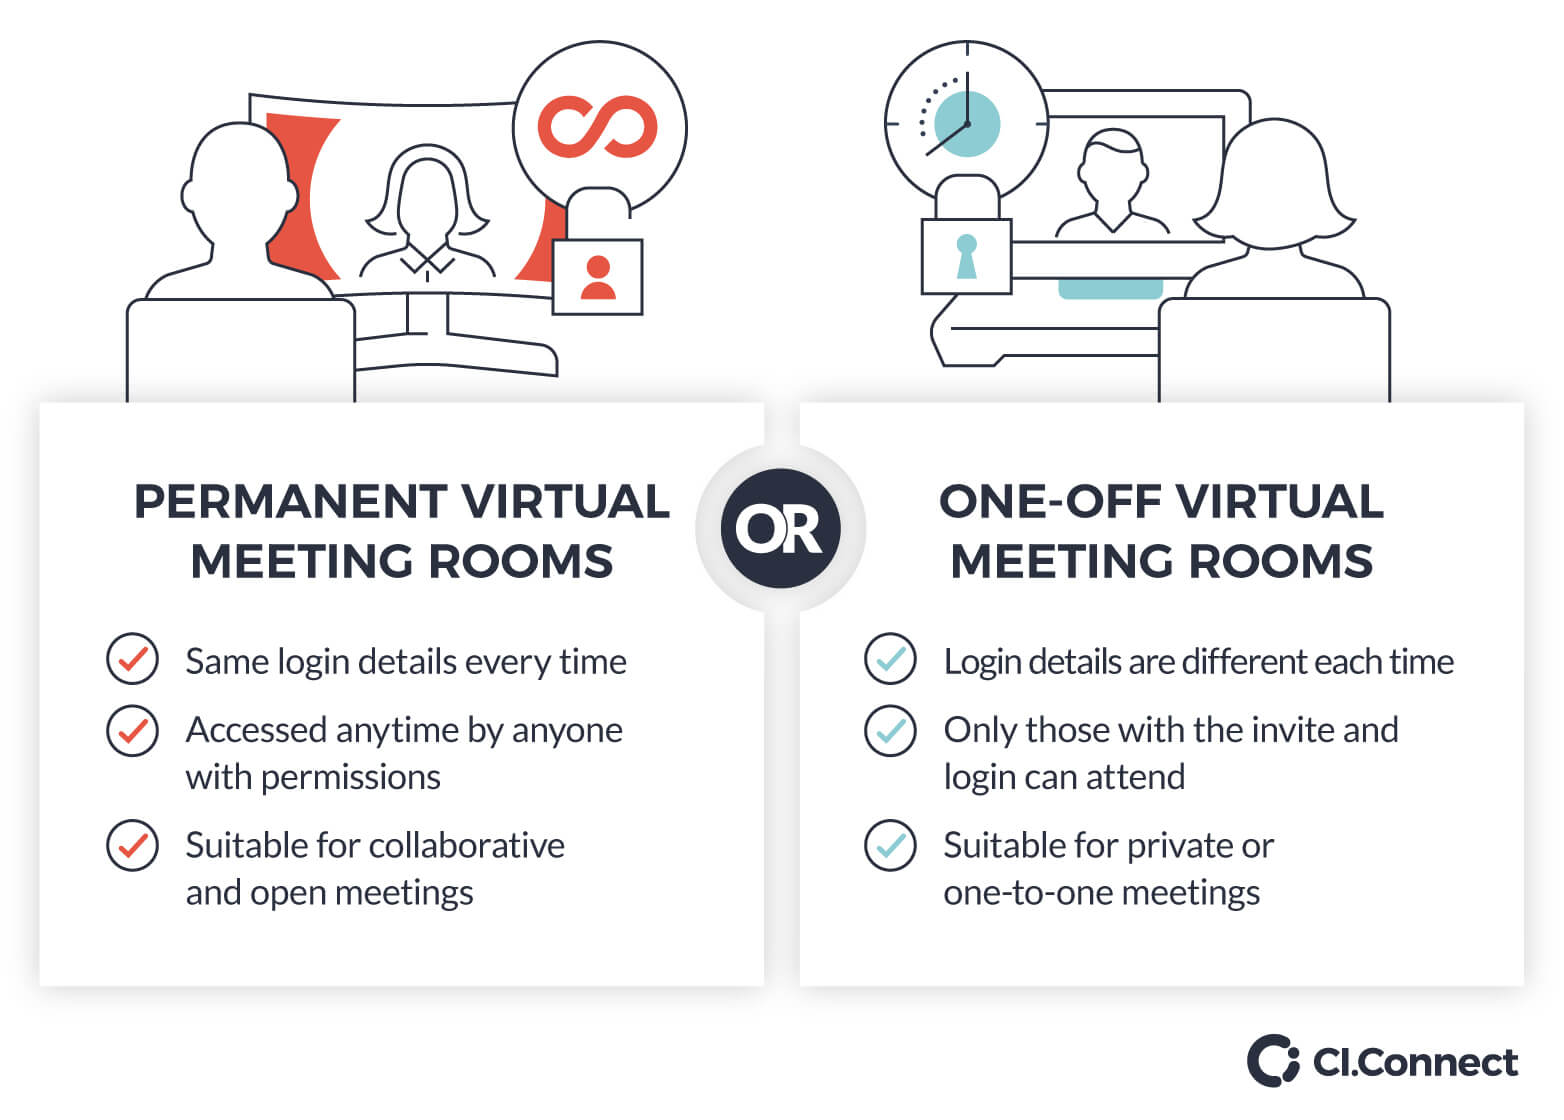 Permanent vs one-off virtual meeting rooms